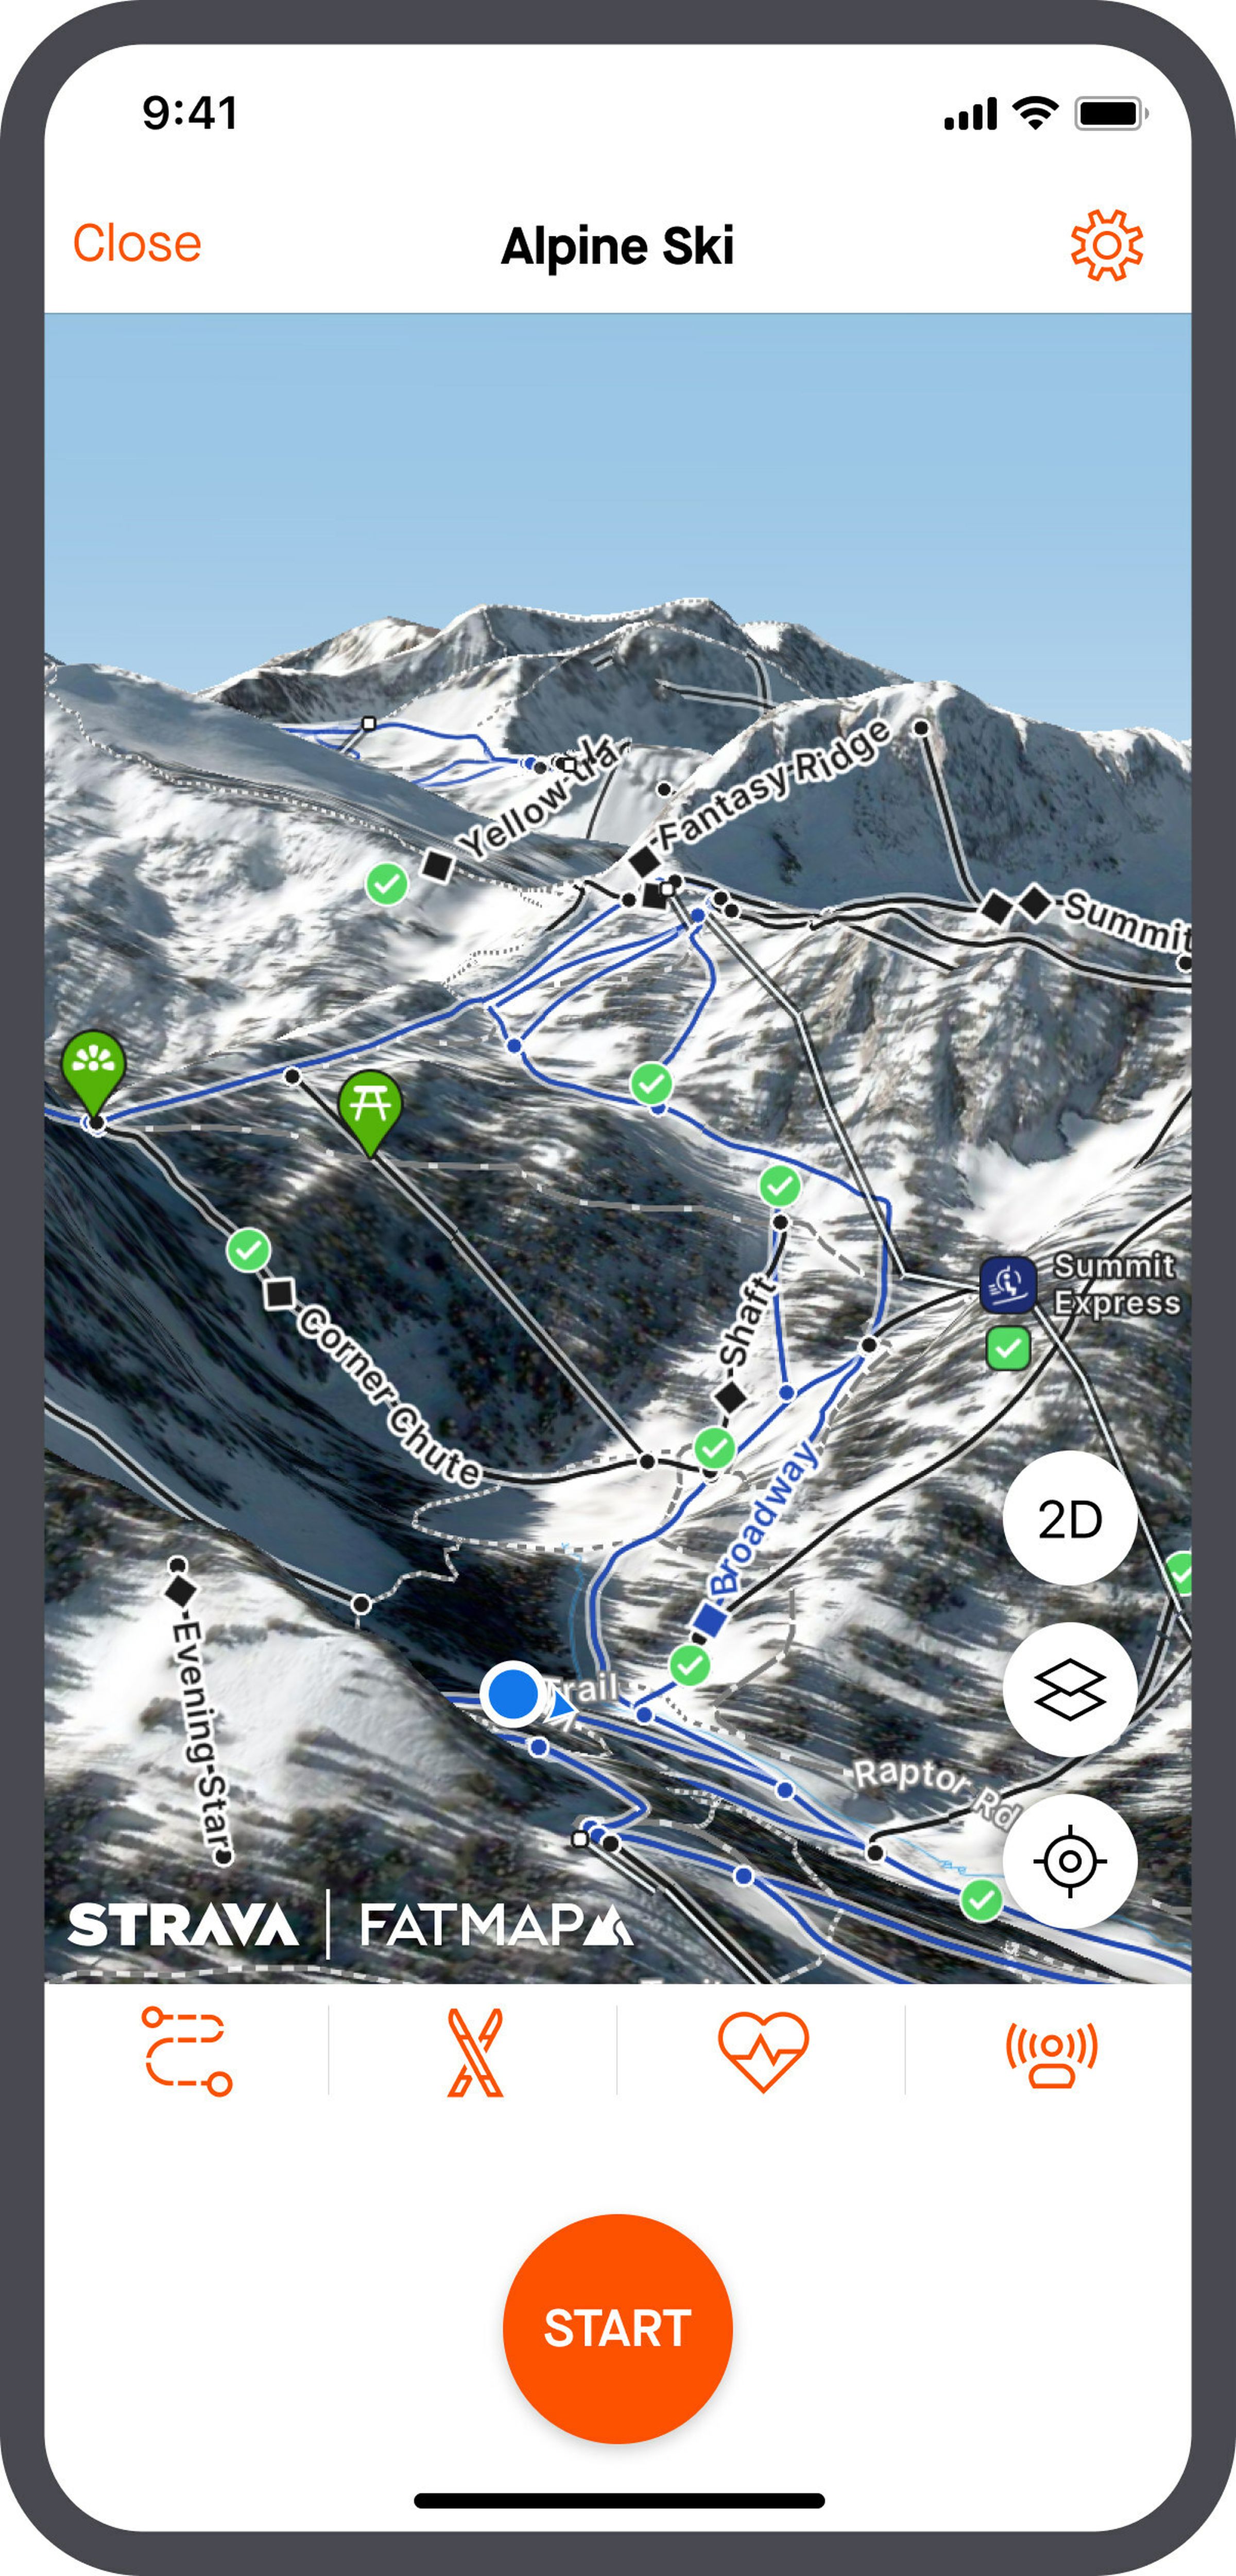 Render of a 3D Alpine ski map with different points of interest in the Strava app.